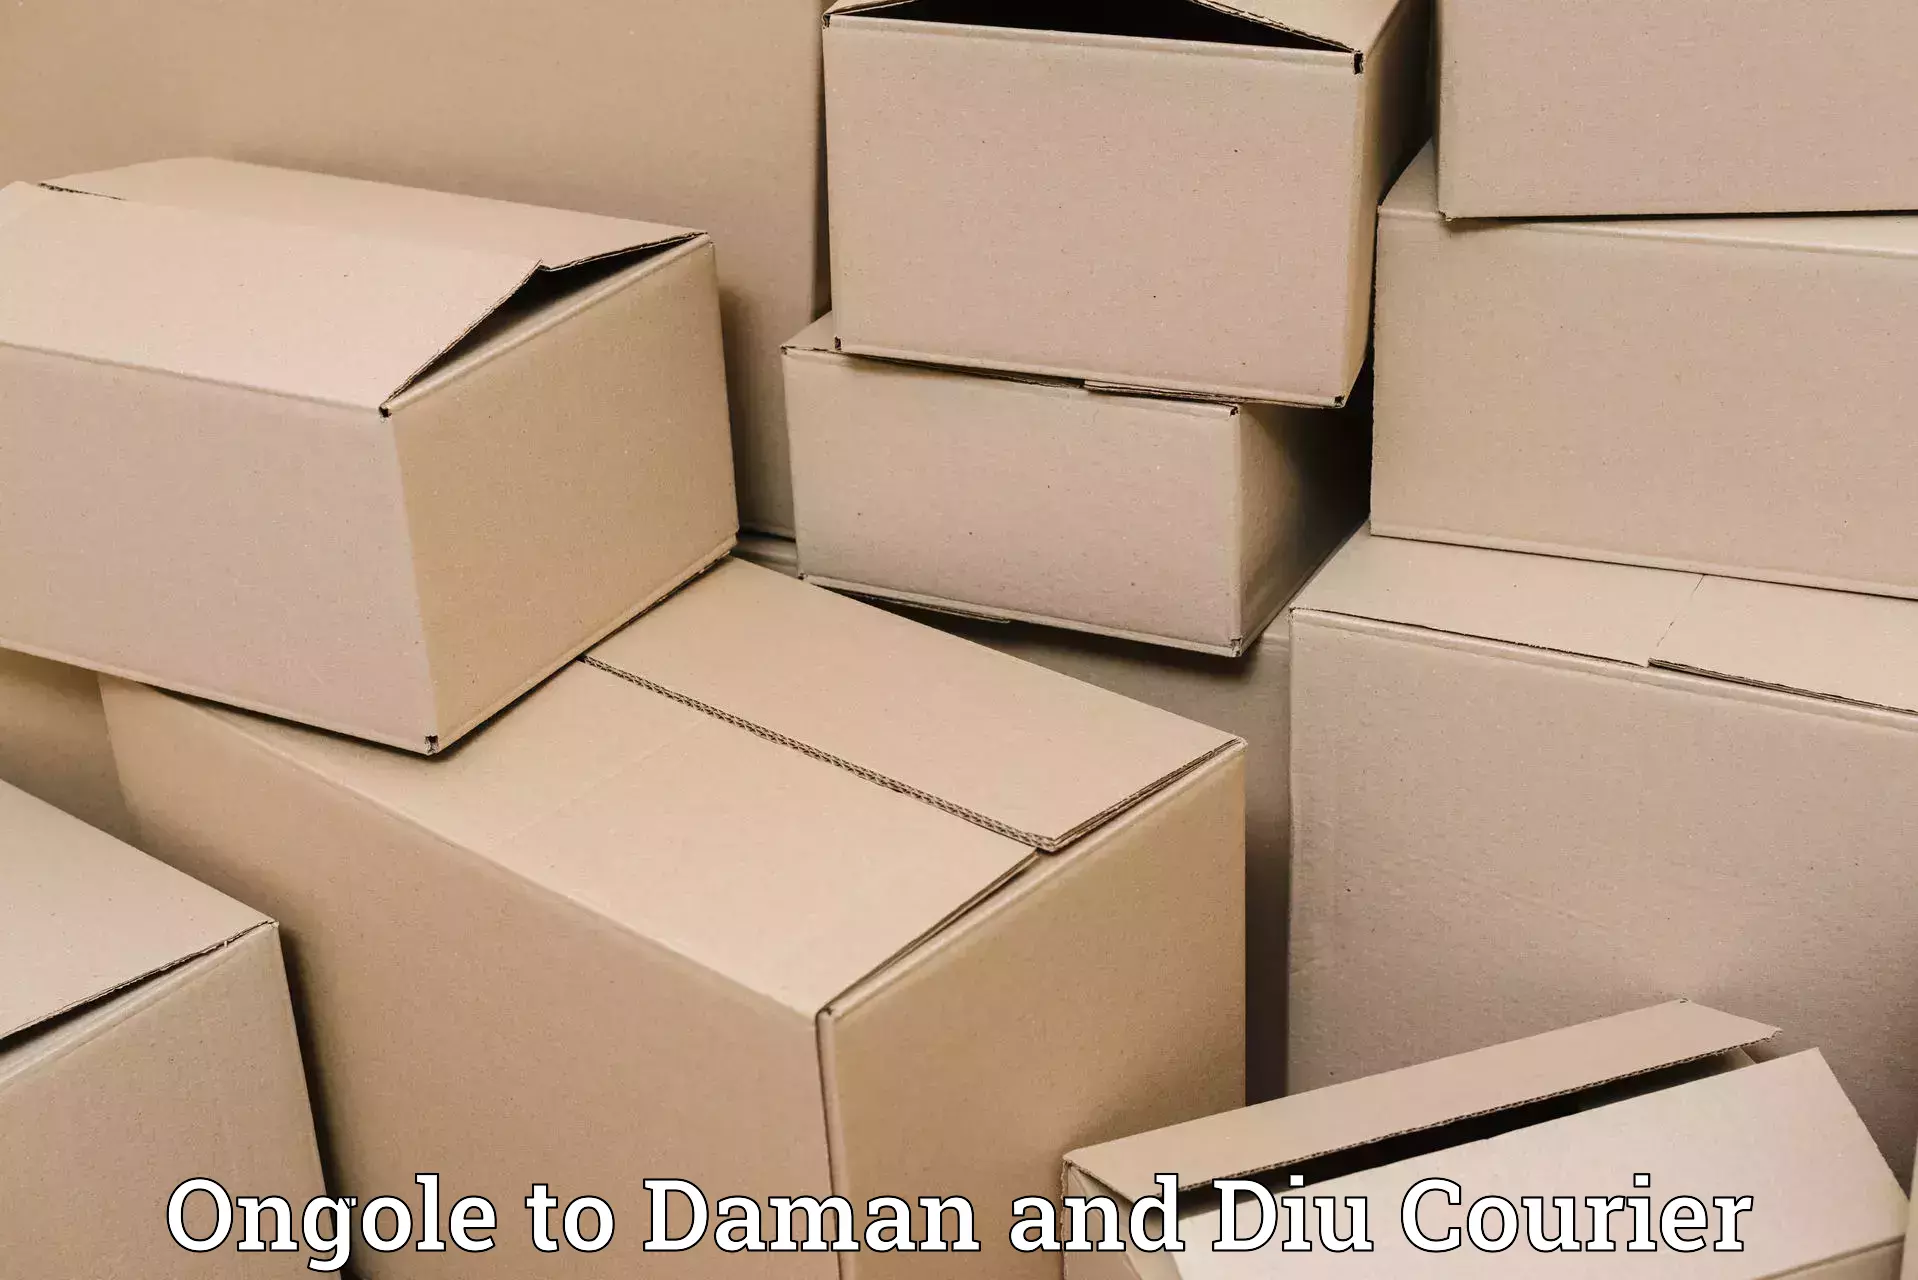 Efficient parcel tracking Ongole to Daman